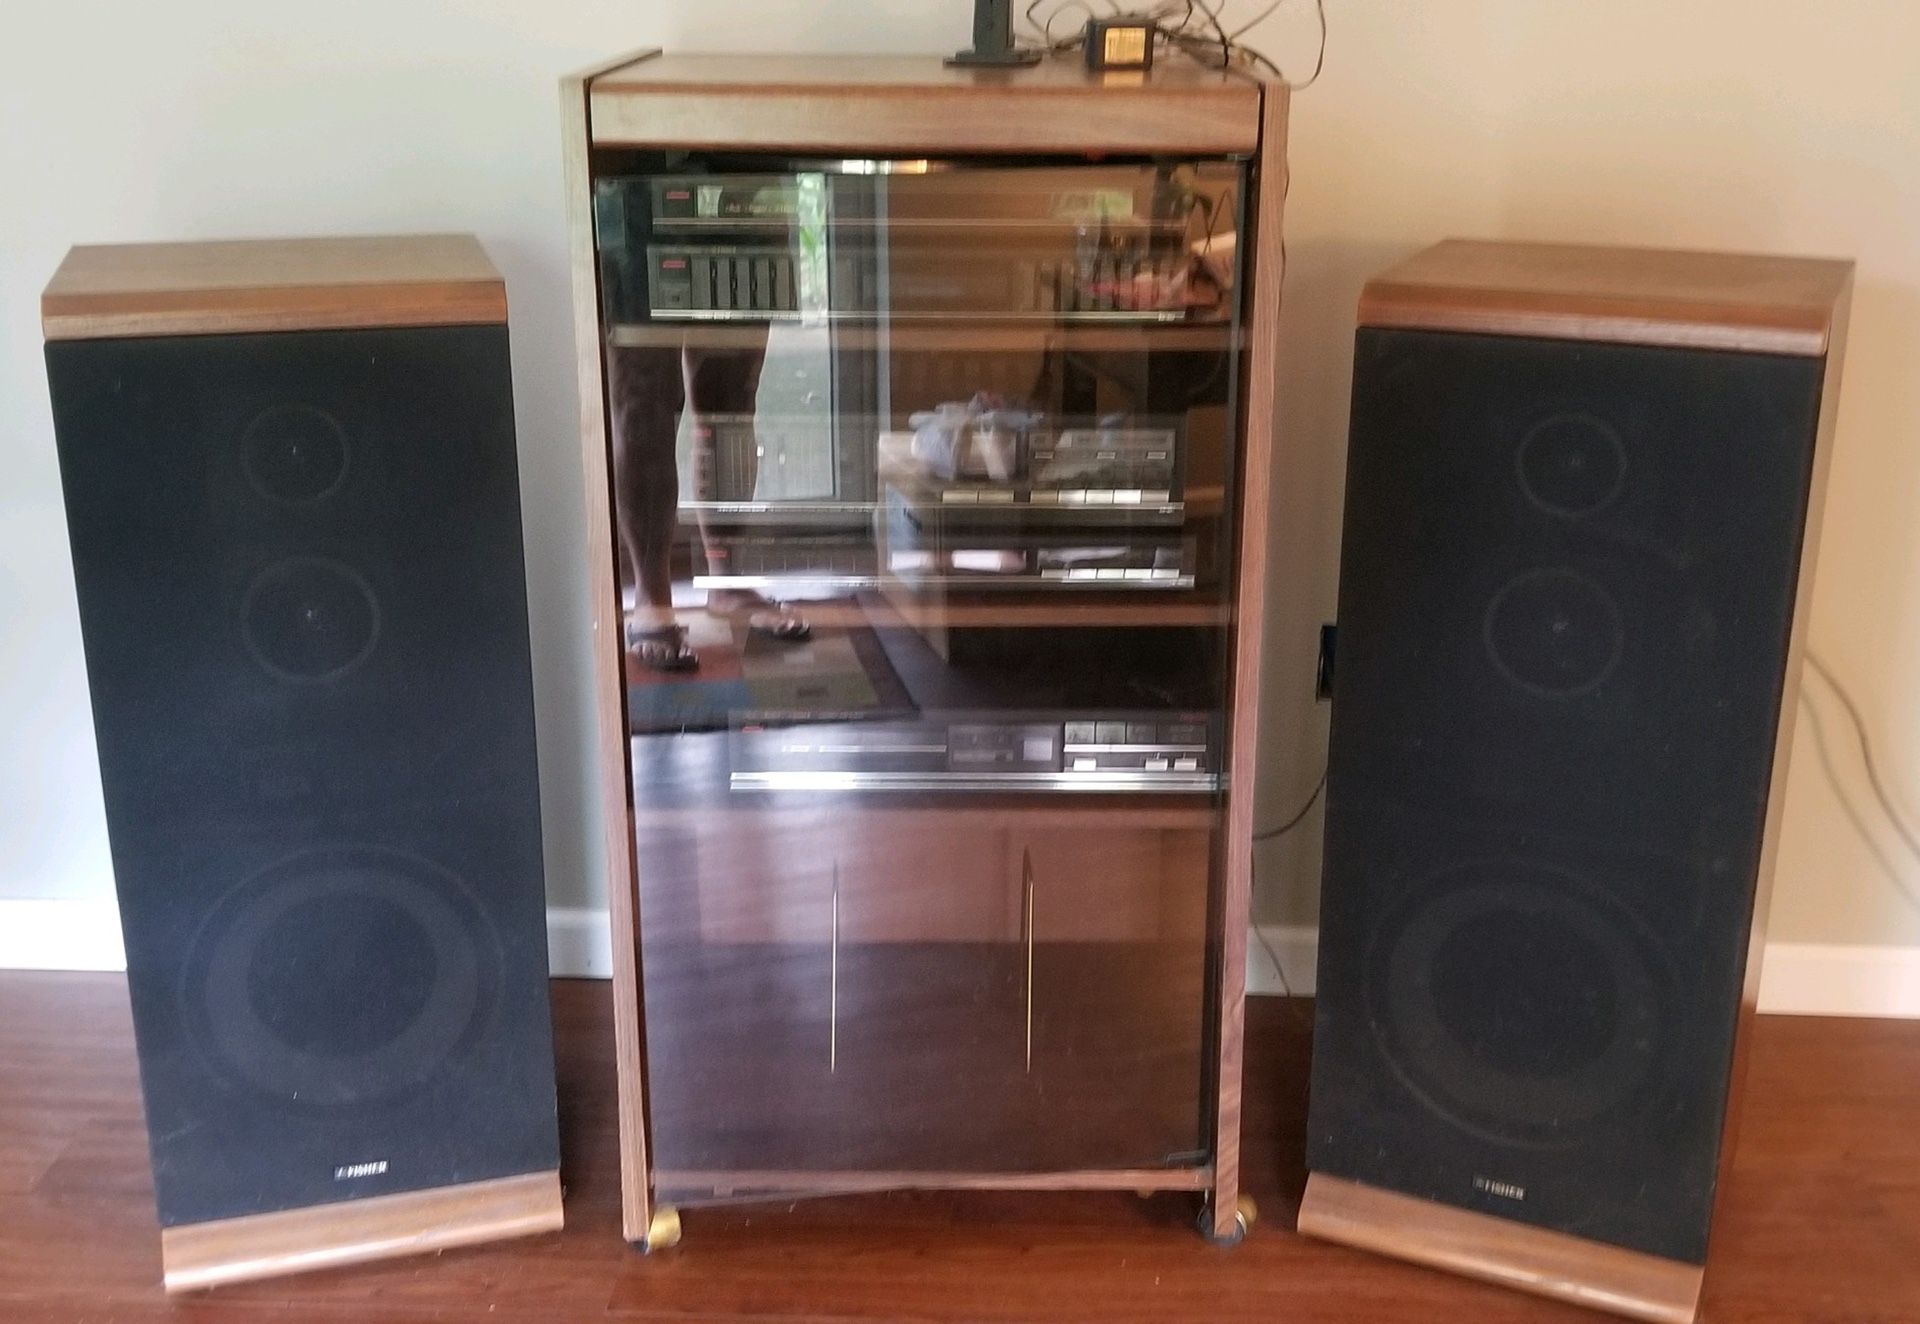 Fisher stereo system